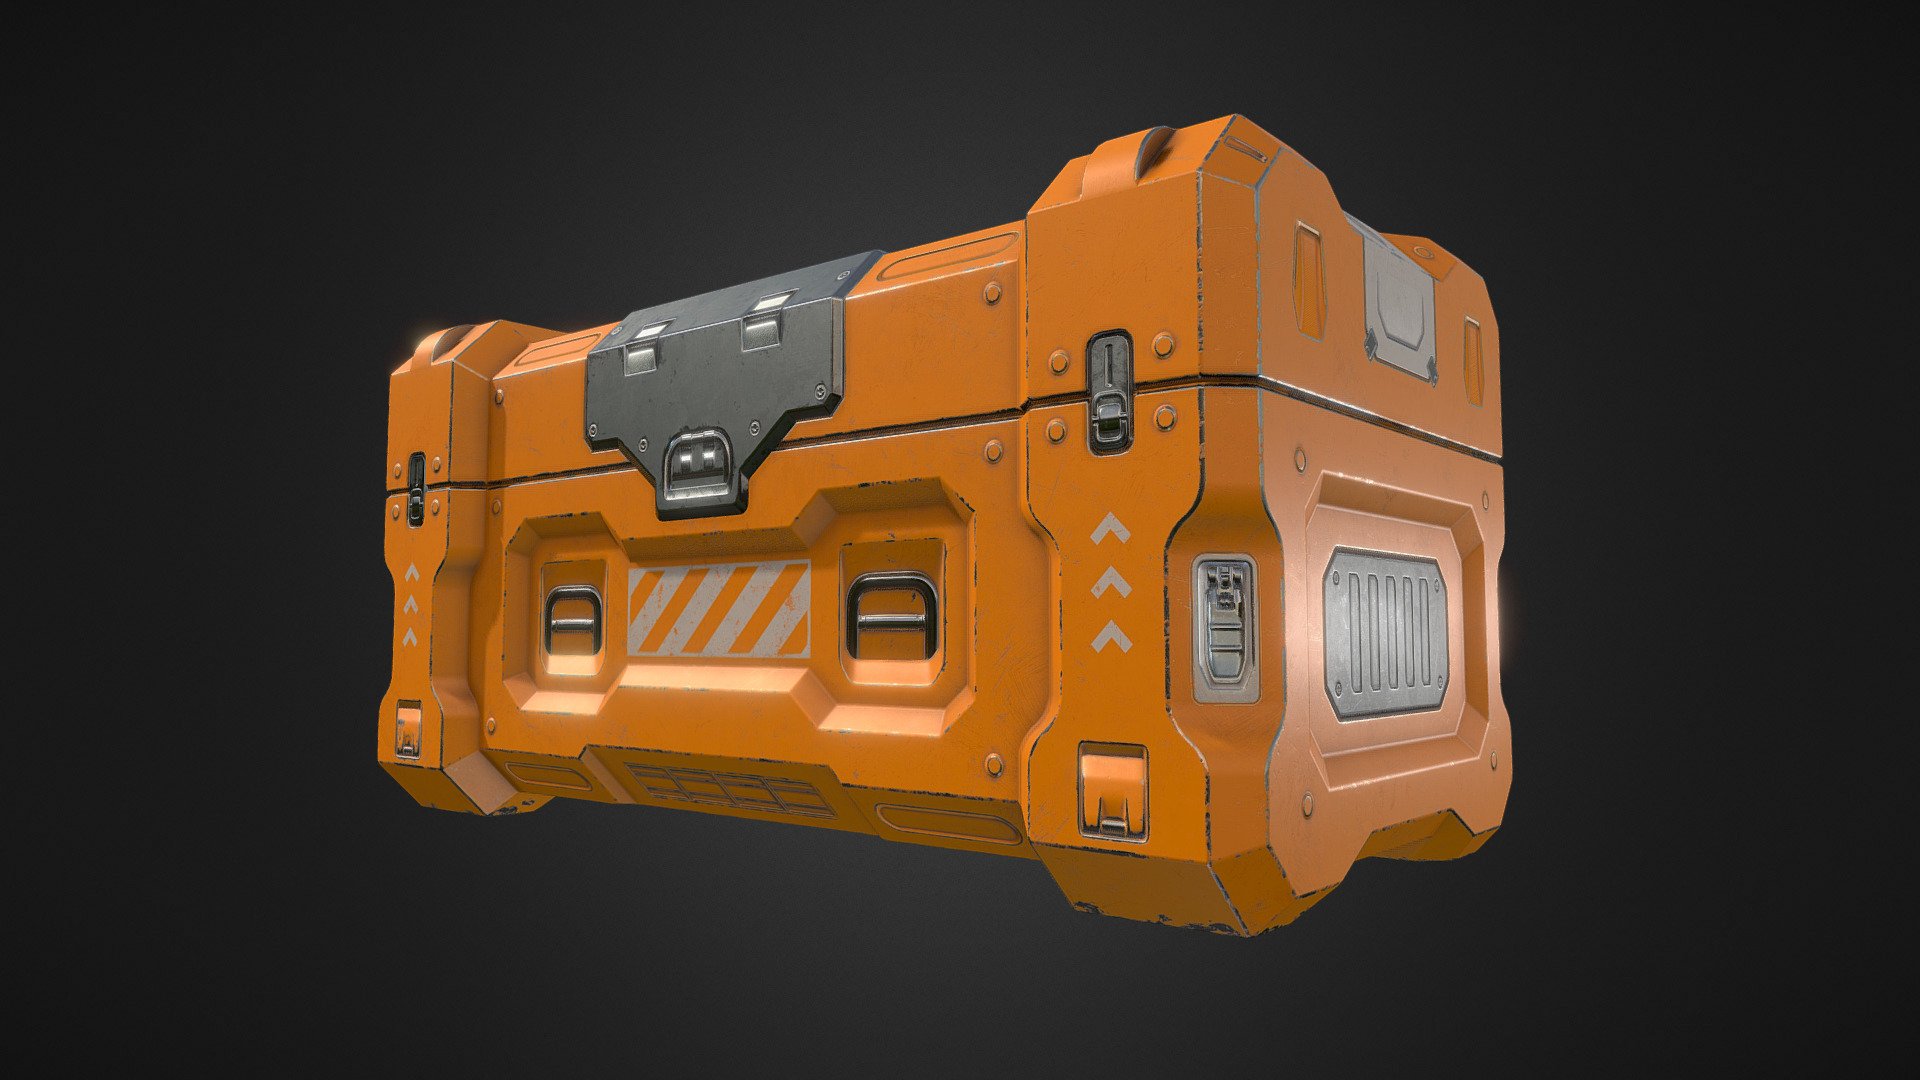 SciFi Container asset for realtime rendering (Unity or Unreal i.e.). The point of this was to make decent looking hardsurface game prop without baking details from high poly to low poly. Most edges are beveled and have modified normals by using &ldquo;Set Normals From Faces